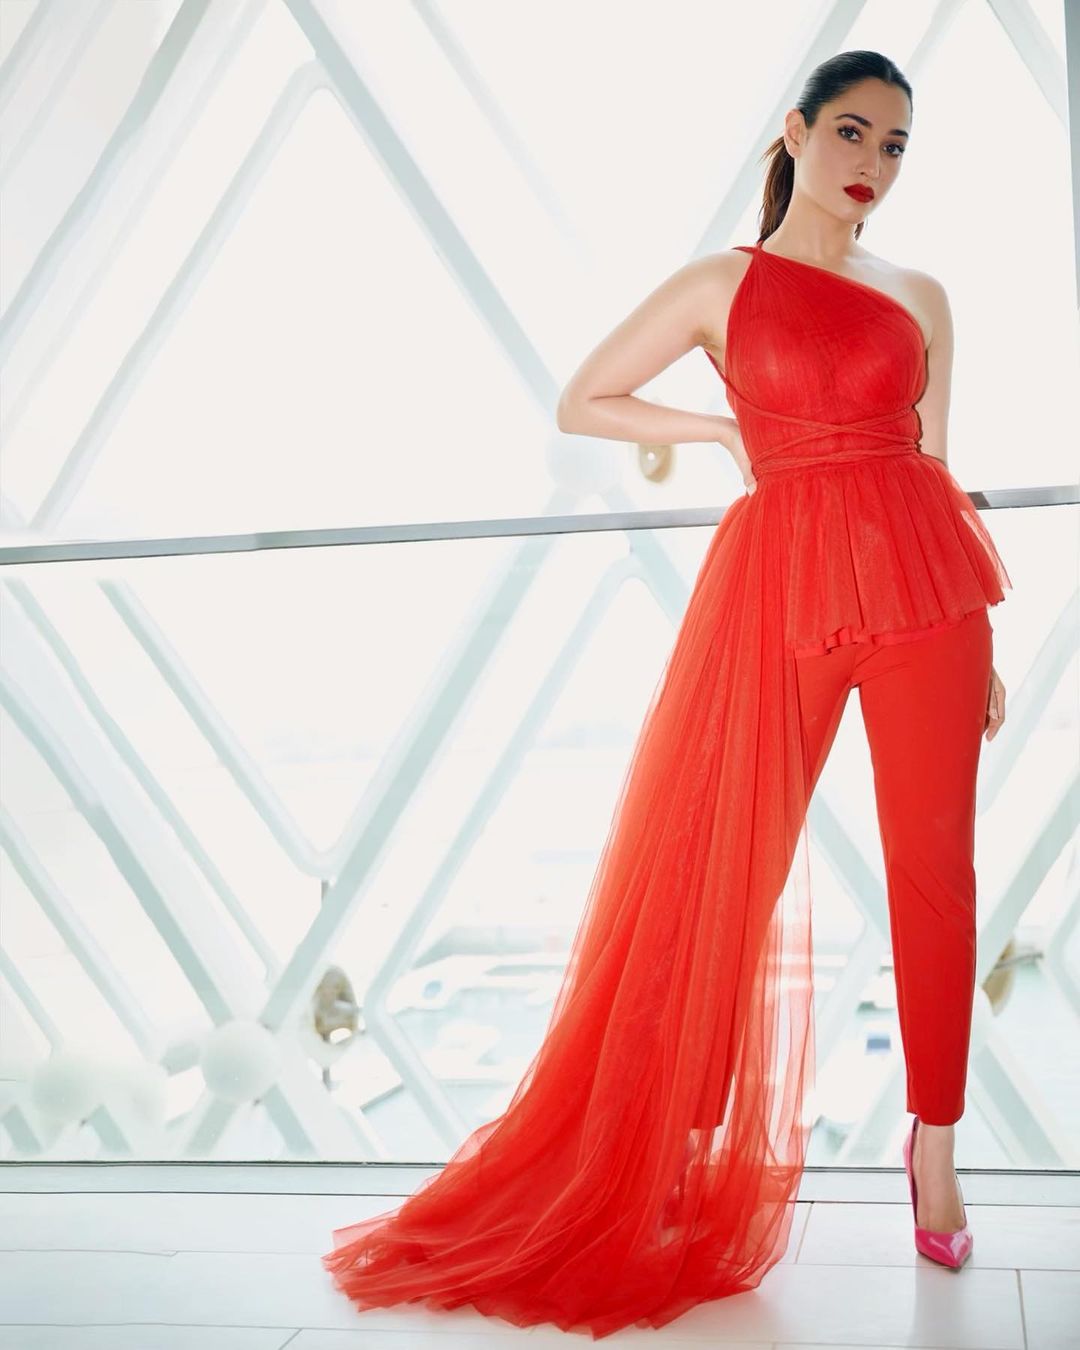 Tamannaah Bhatia looks sexy in the red jumpsuit with a tulle train